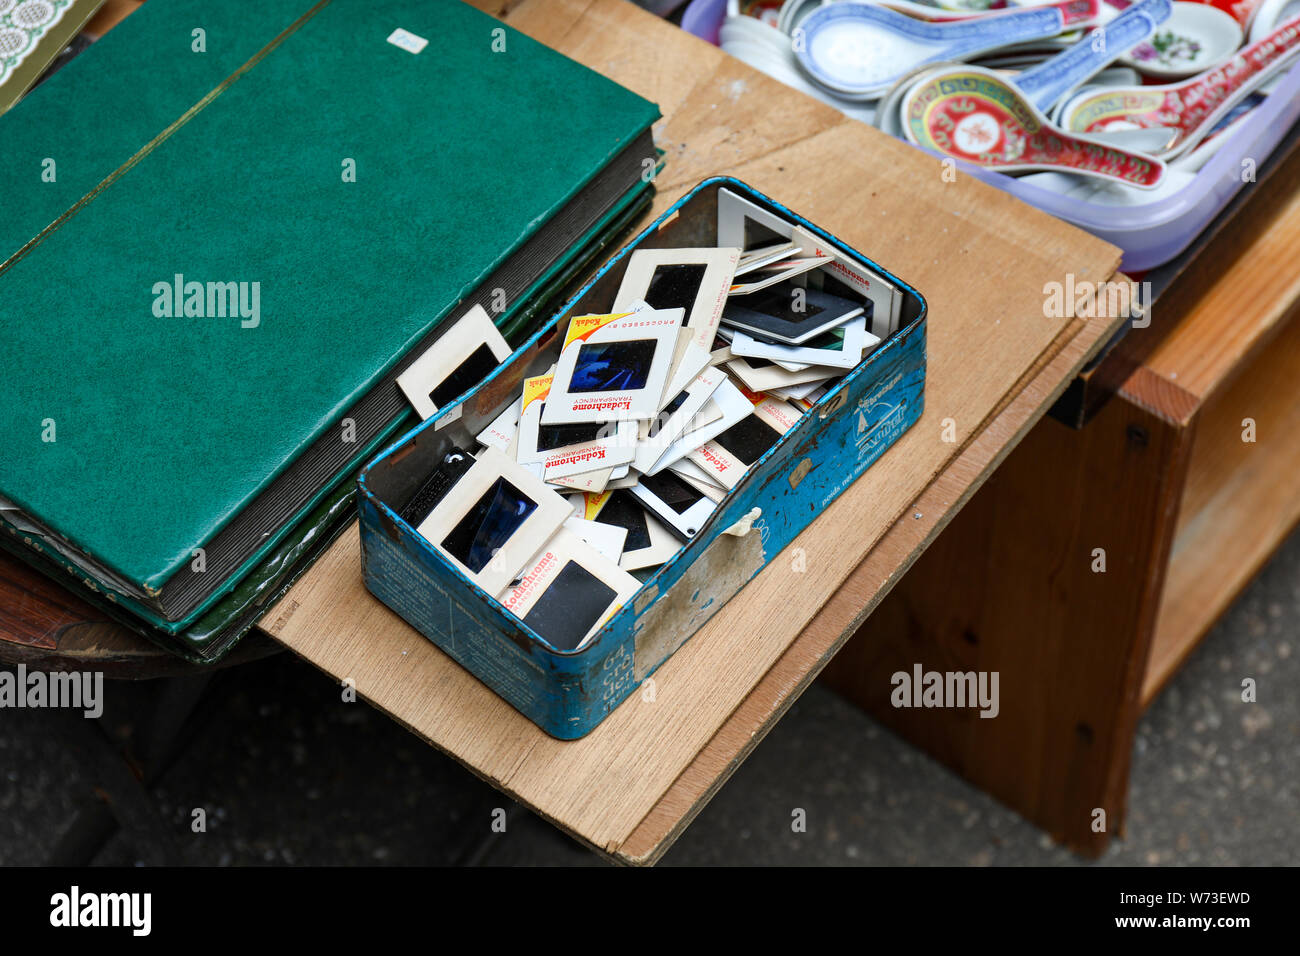 Vintage slides in a blue box sold at Cat Street Flea Market in Hong Kong Stock Photo